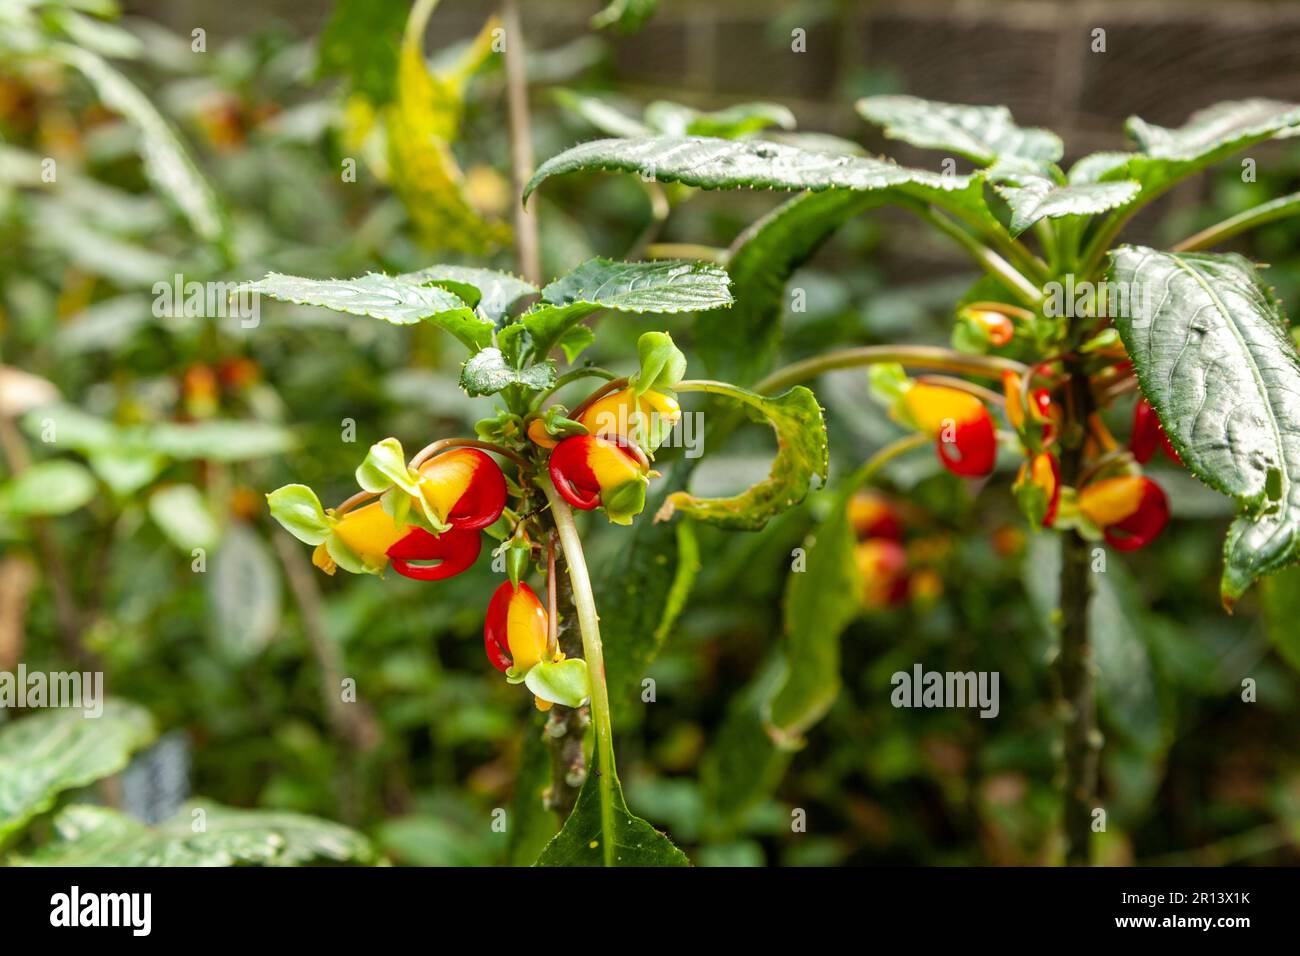 Impatiens niamniamensis, common name Congo cockatoo, parrot impatiens or simply parrot plant, is a species of flowering plant in the family Balsaminac Stock Photo